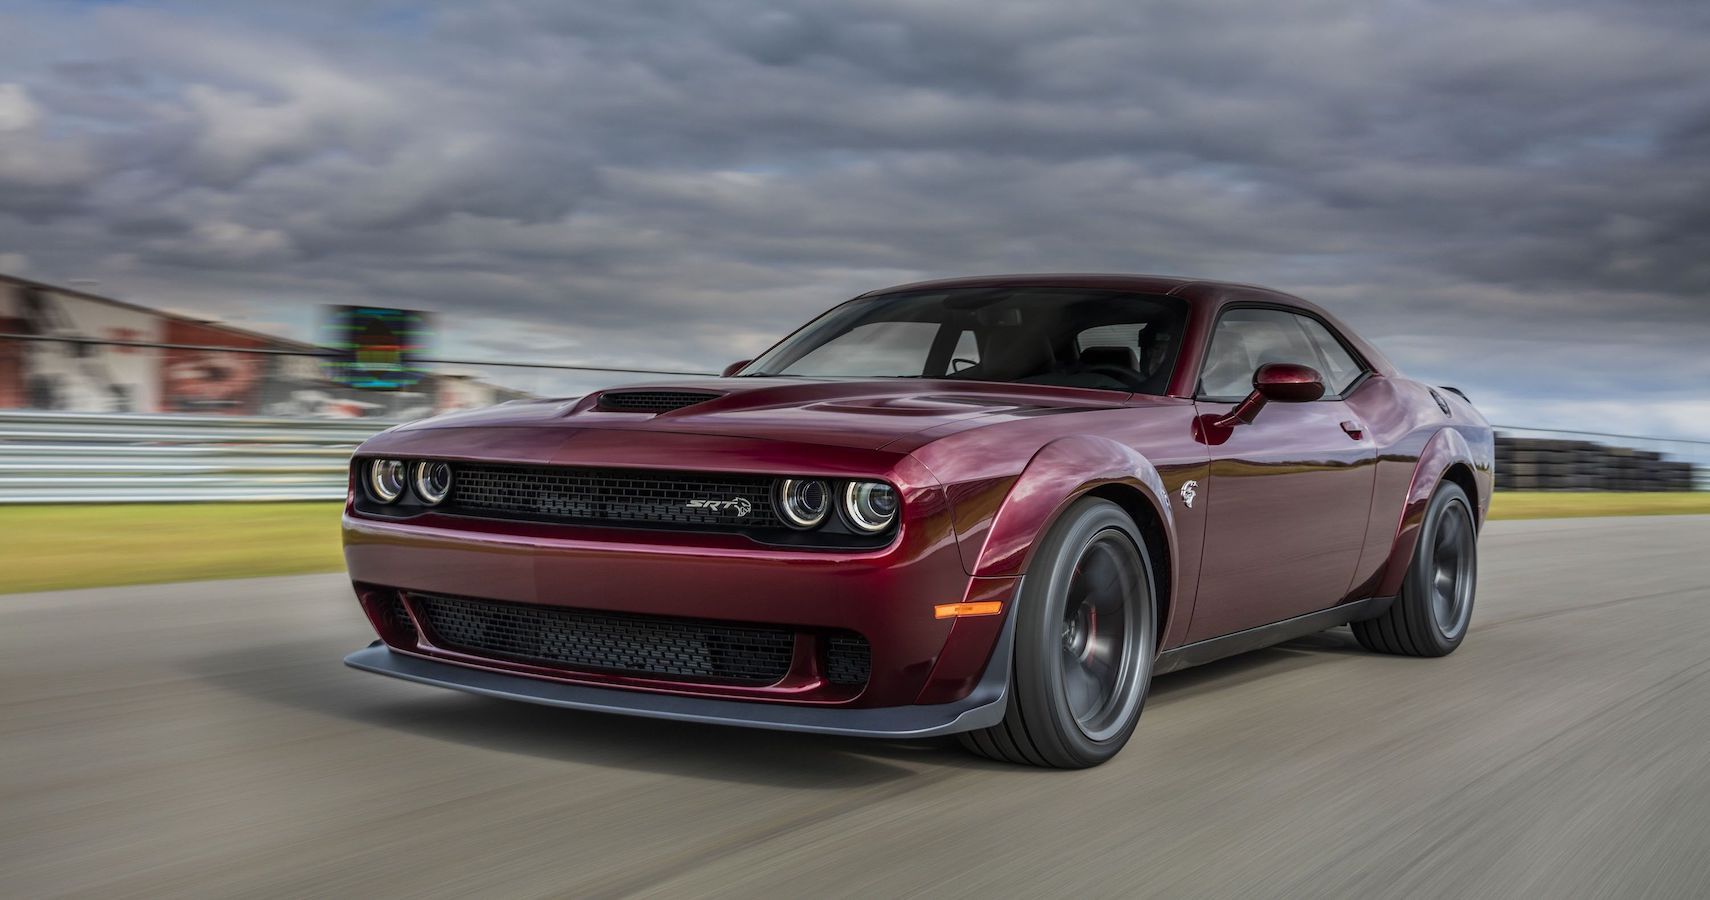 Dodge To Mark The End Of Its V8 Era With Final "Last Call" Model